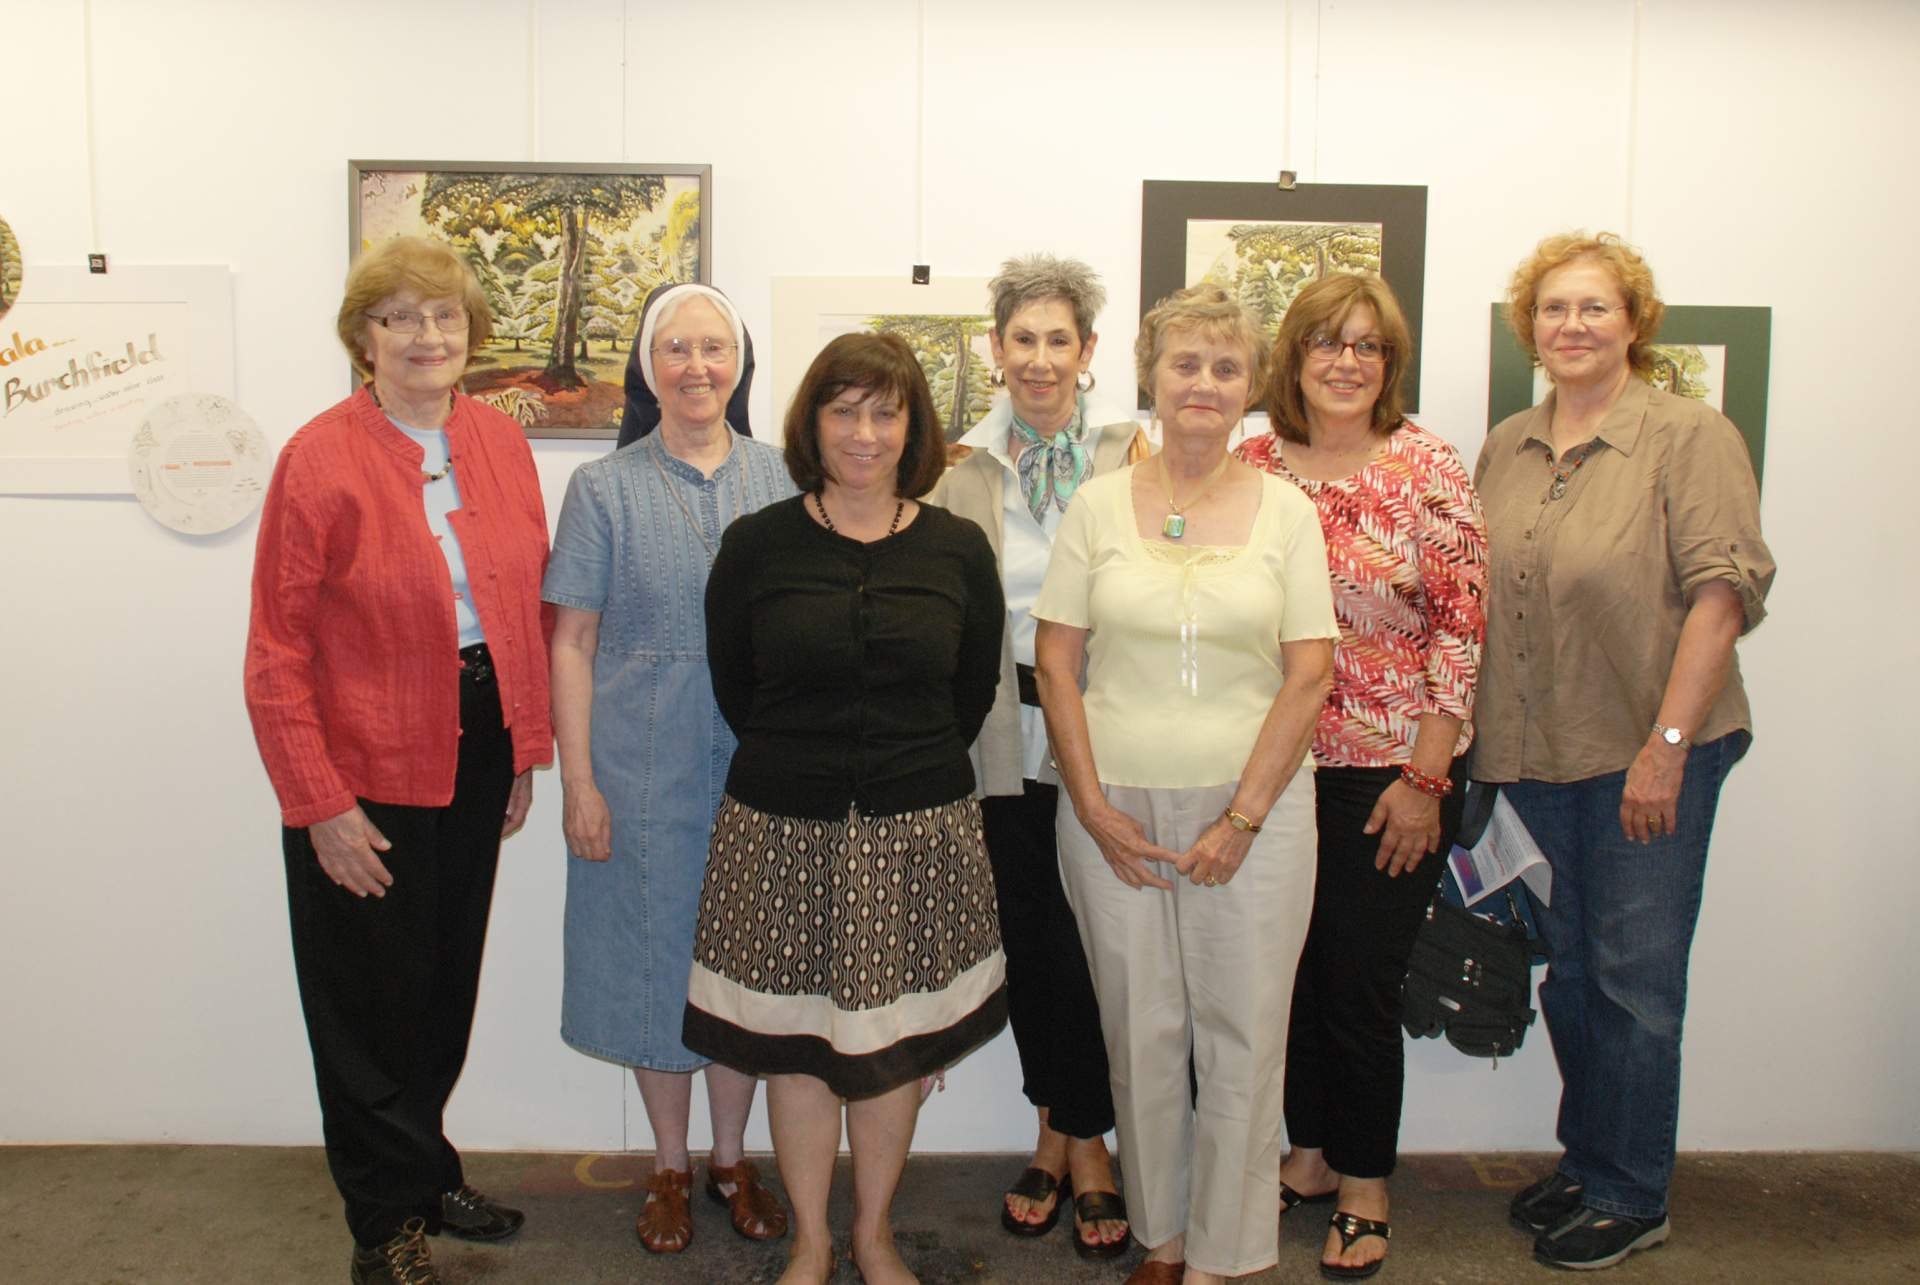 Summer excursions with the Burchfield Penney Docents by guest writer Jane Rube